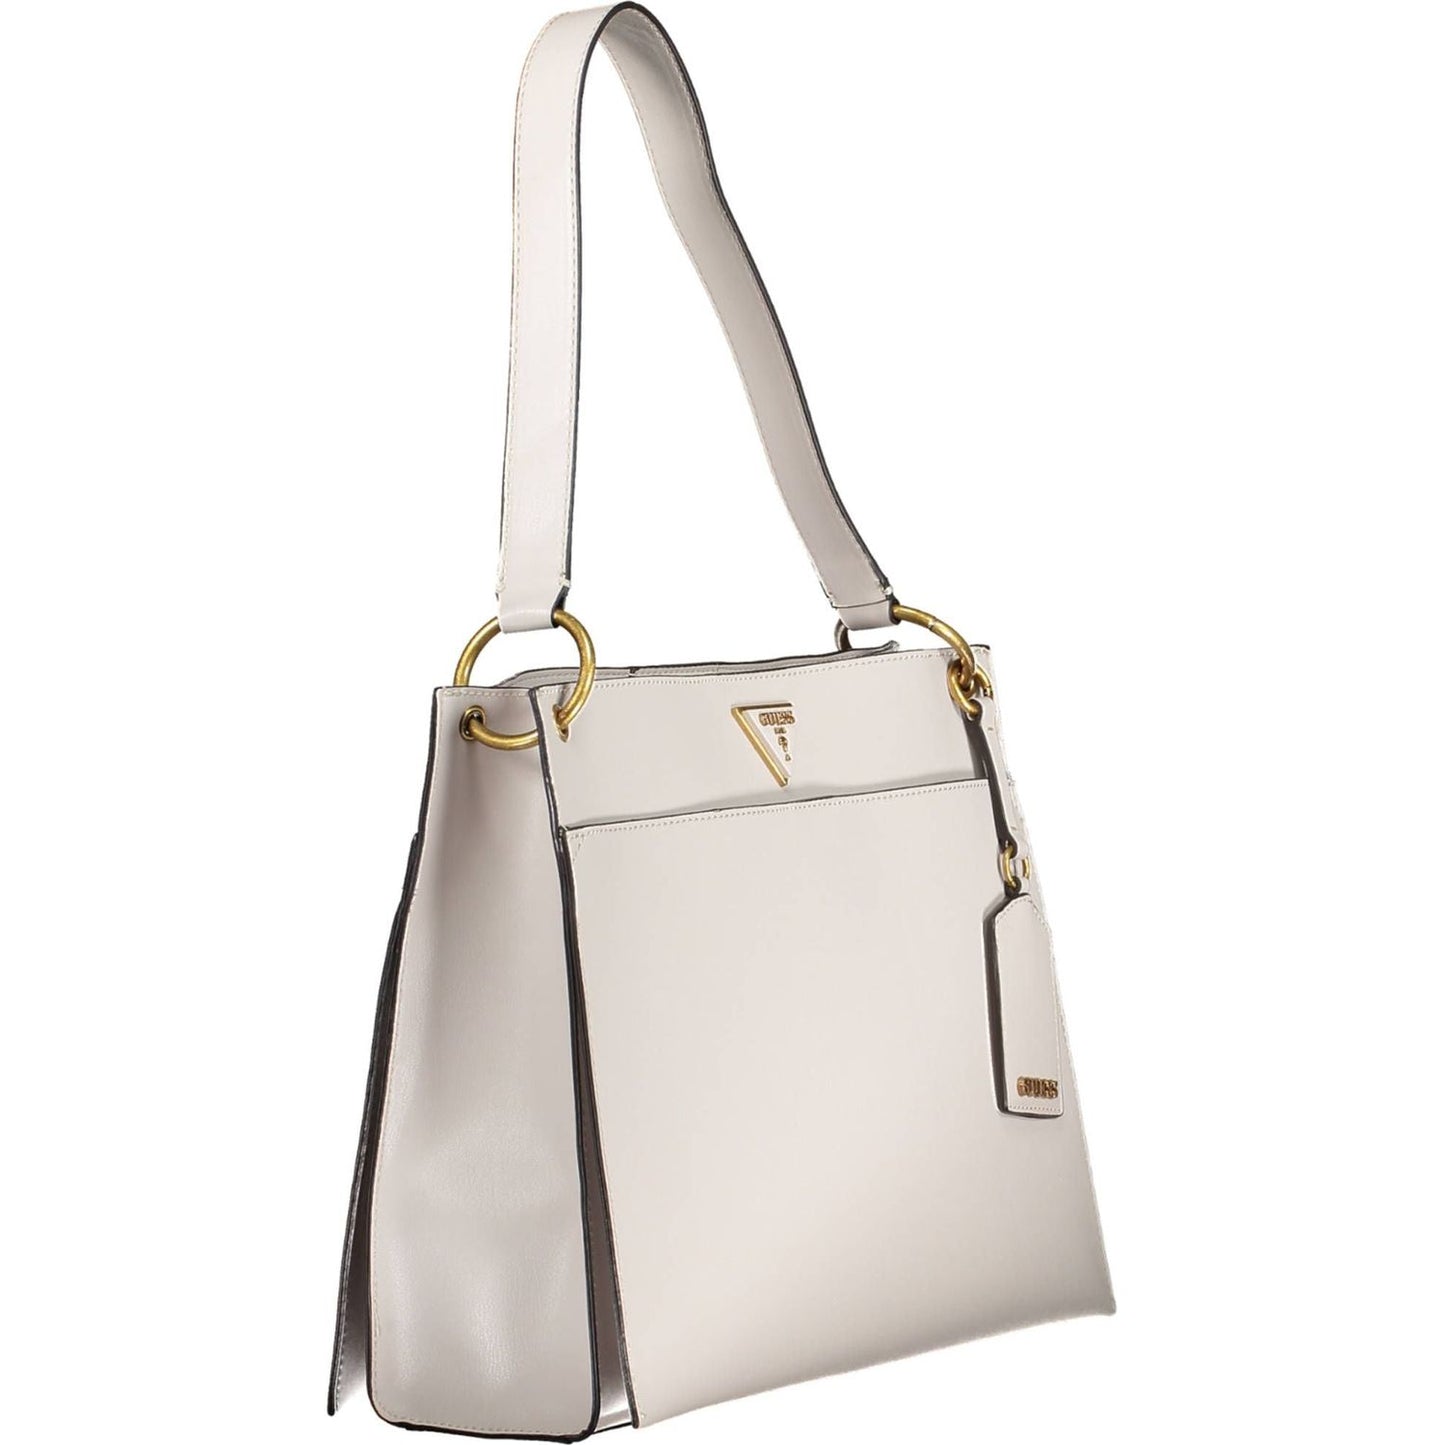 Guess Jeans Chic Gray Shoulder Bag with Contrasting Details chic-gray-shoulder-bag-with-contrasting-details-1